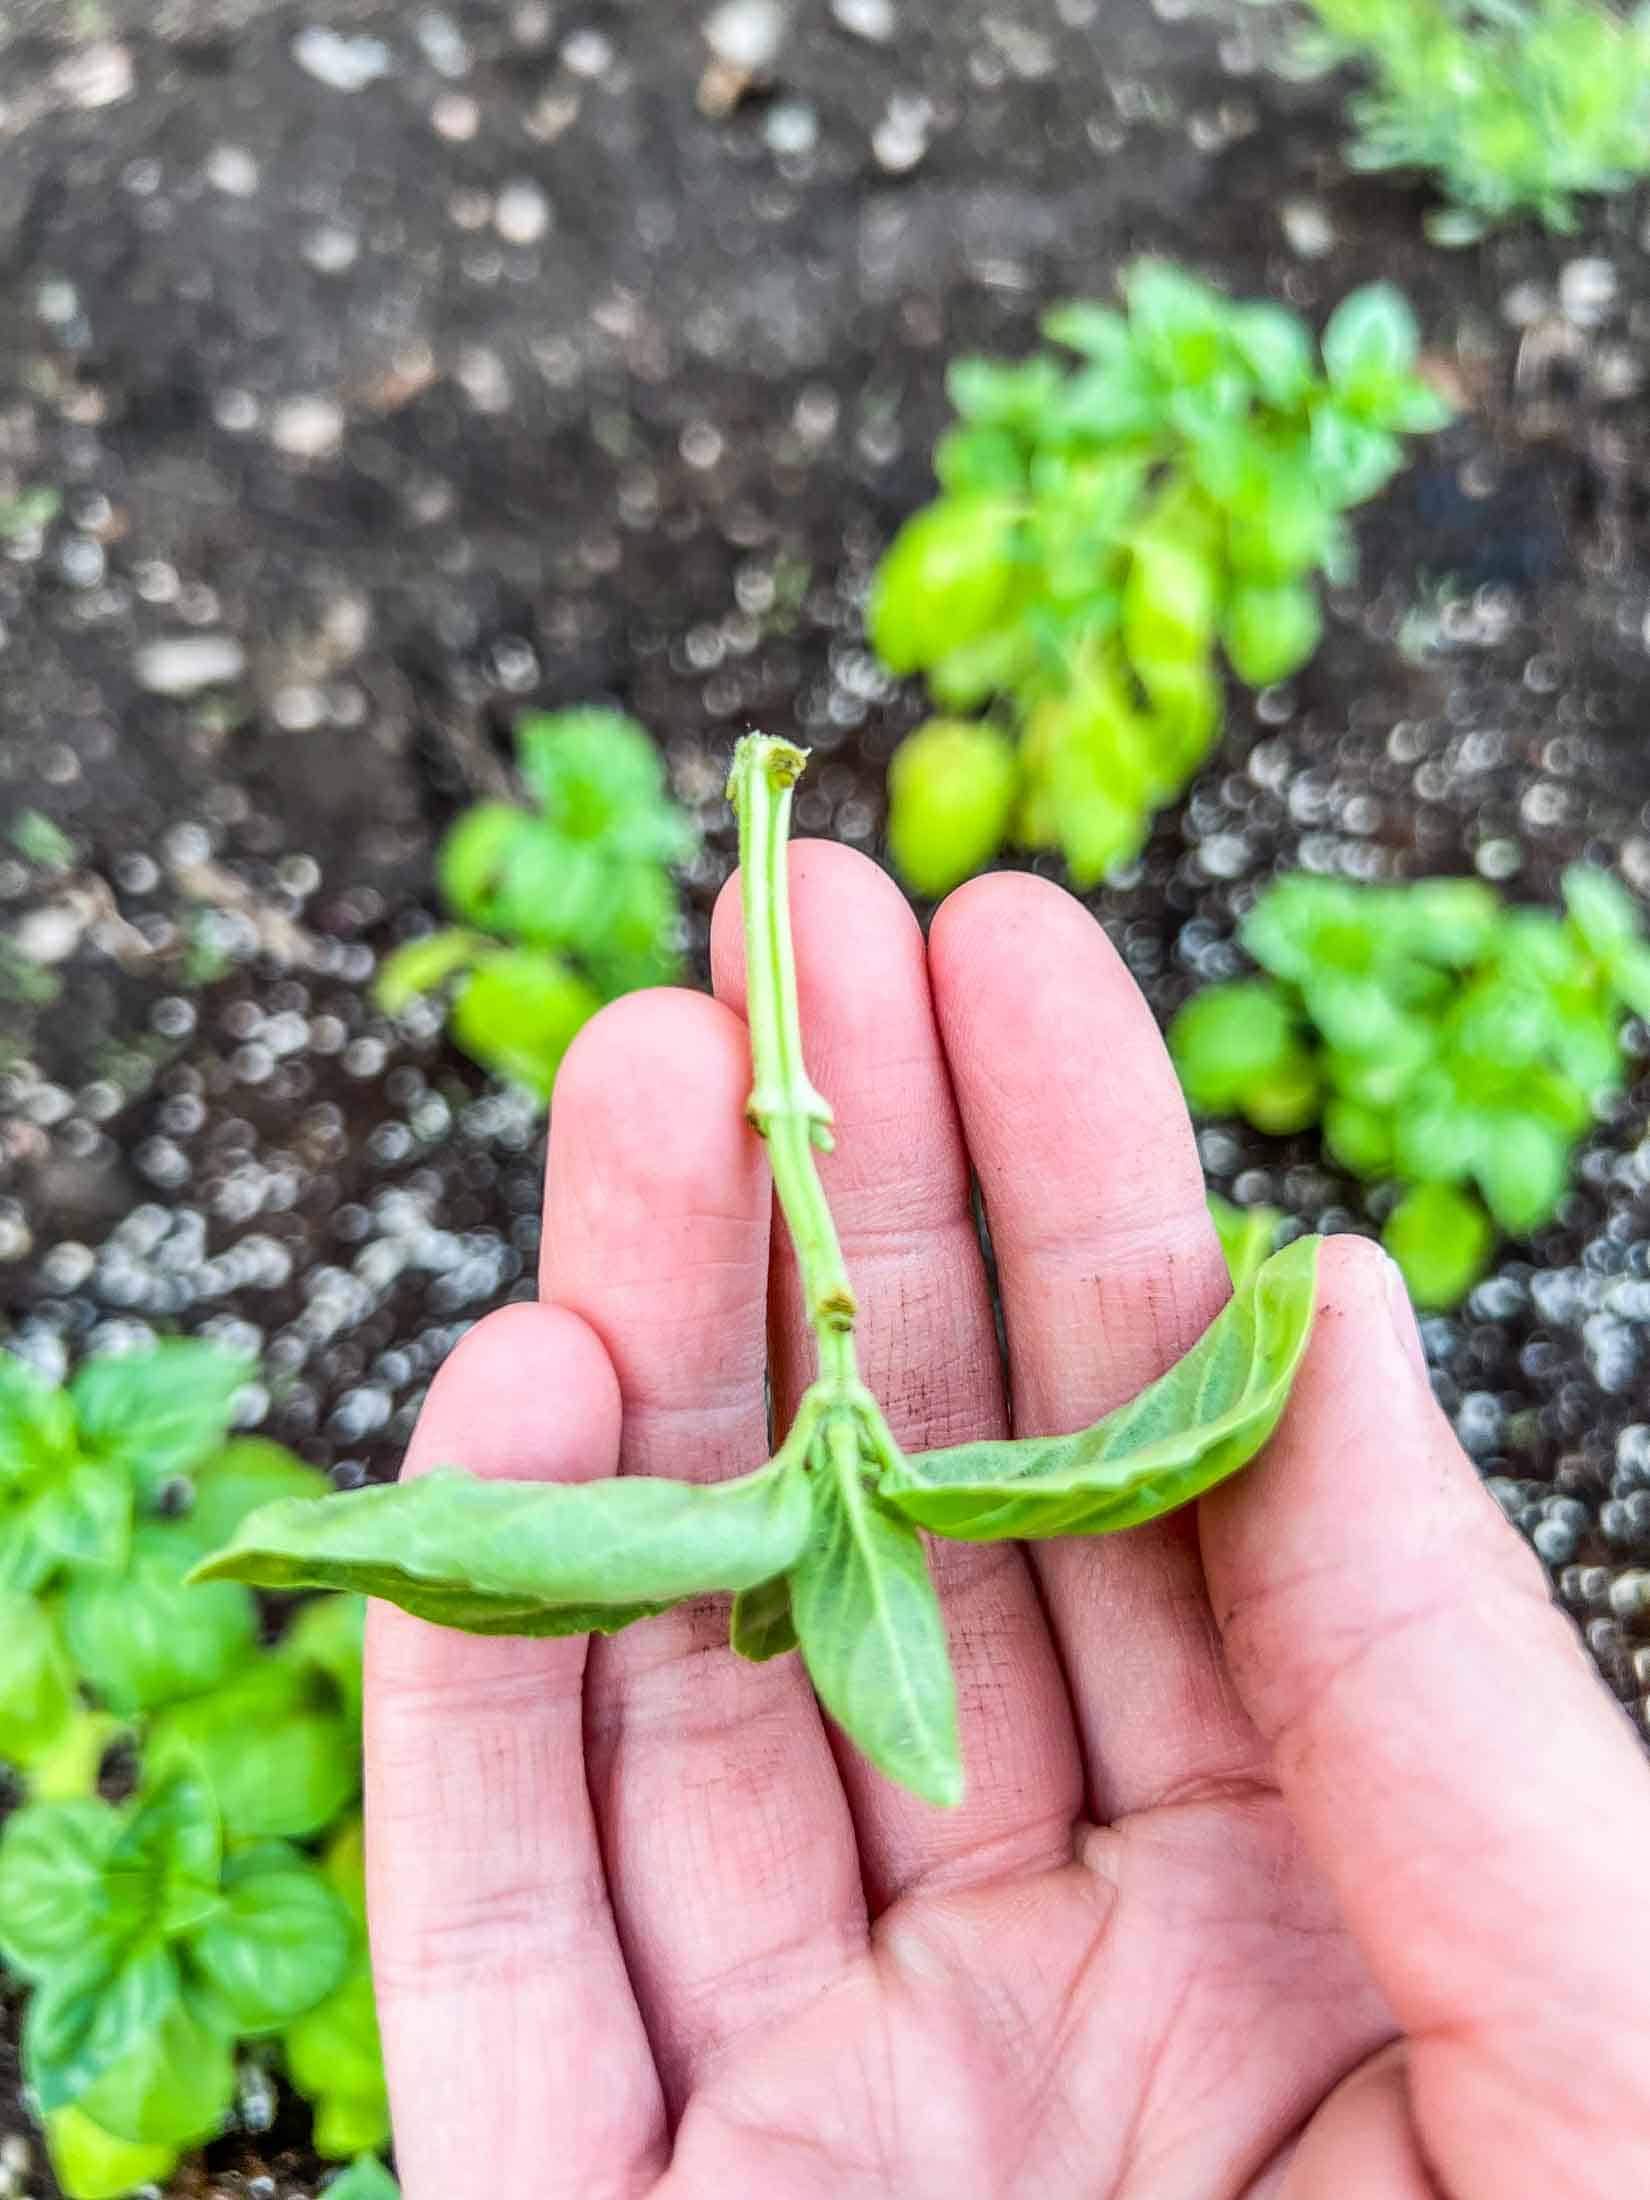 A pruned basil cutting being held in a hand.